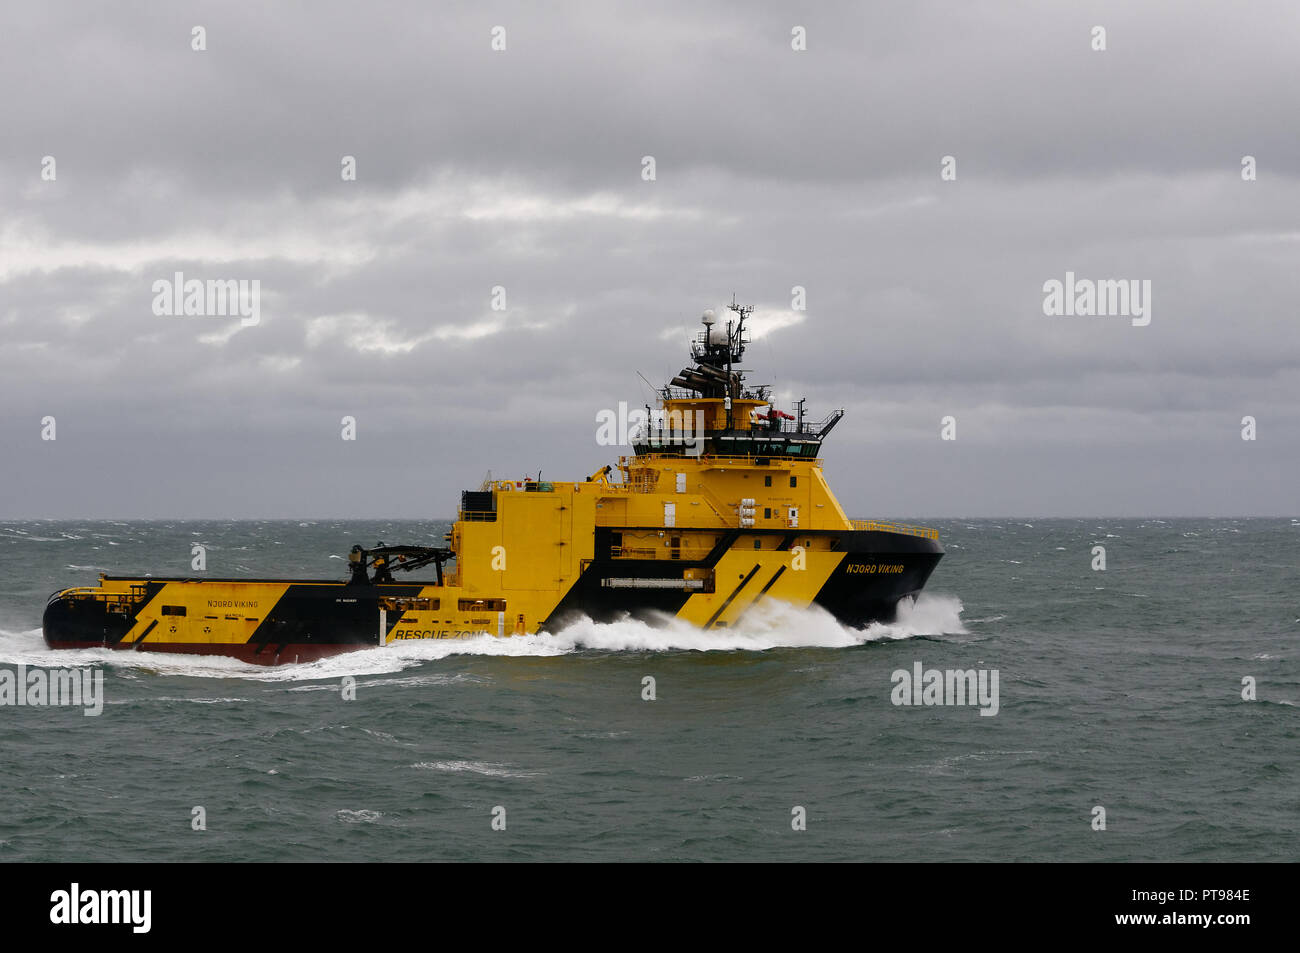 The Njord Viking High Ice-classed AHTS vessel capable of operations in harsh environment offshore seen approaching Aberdeen Harbour, Scotland Stock Photo